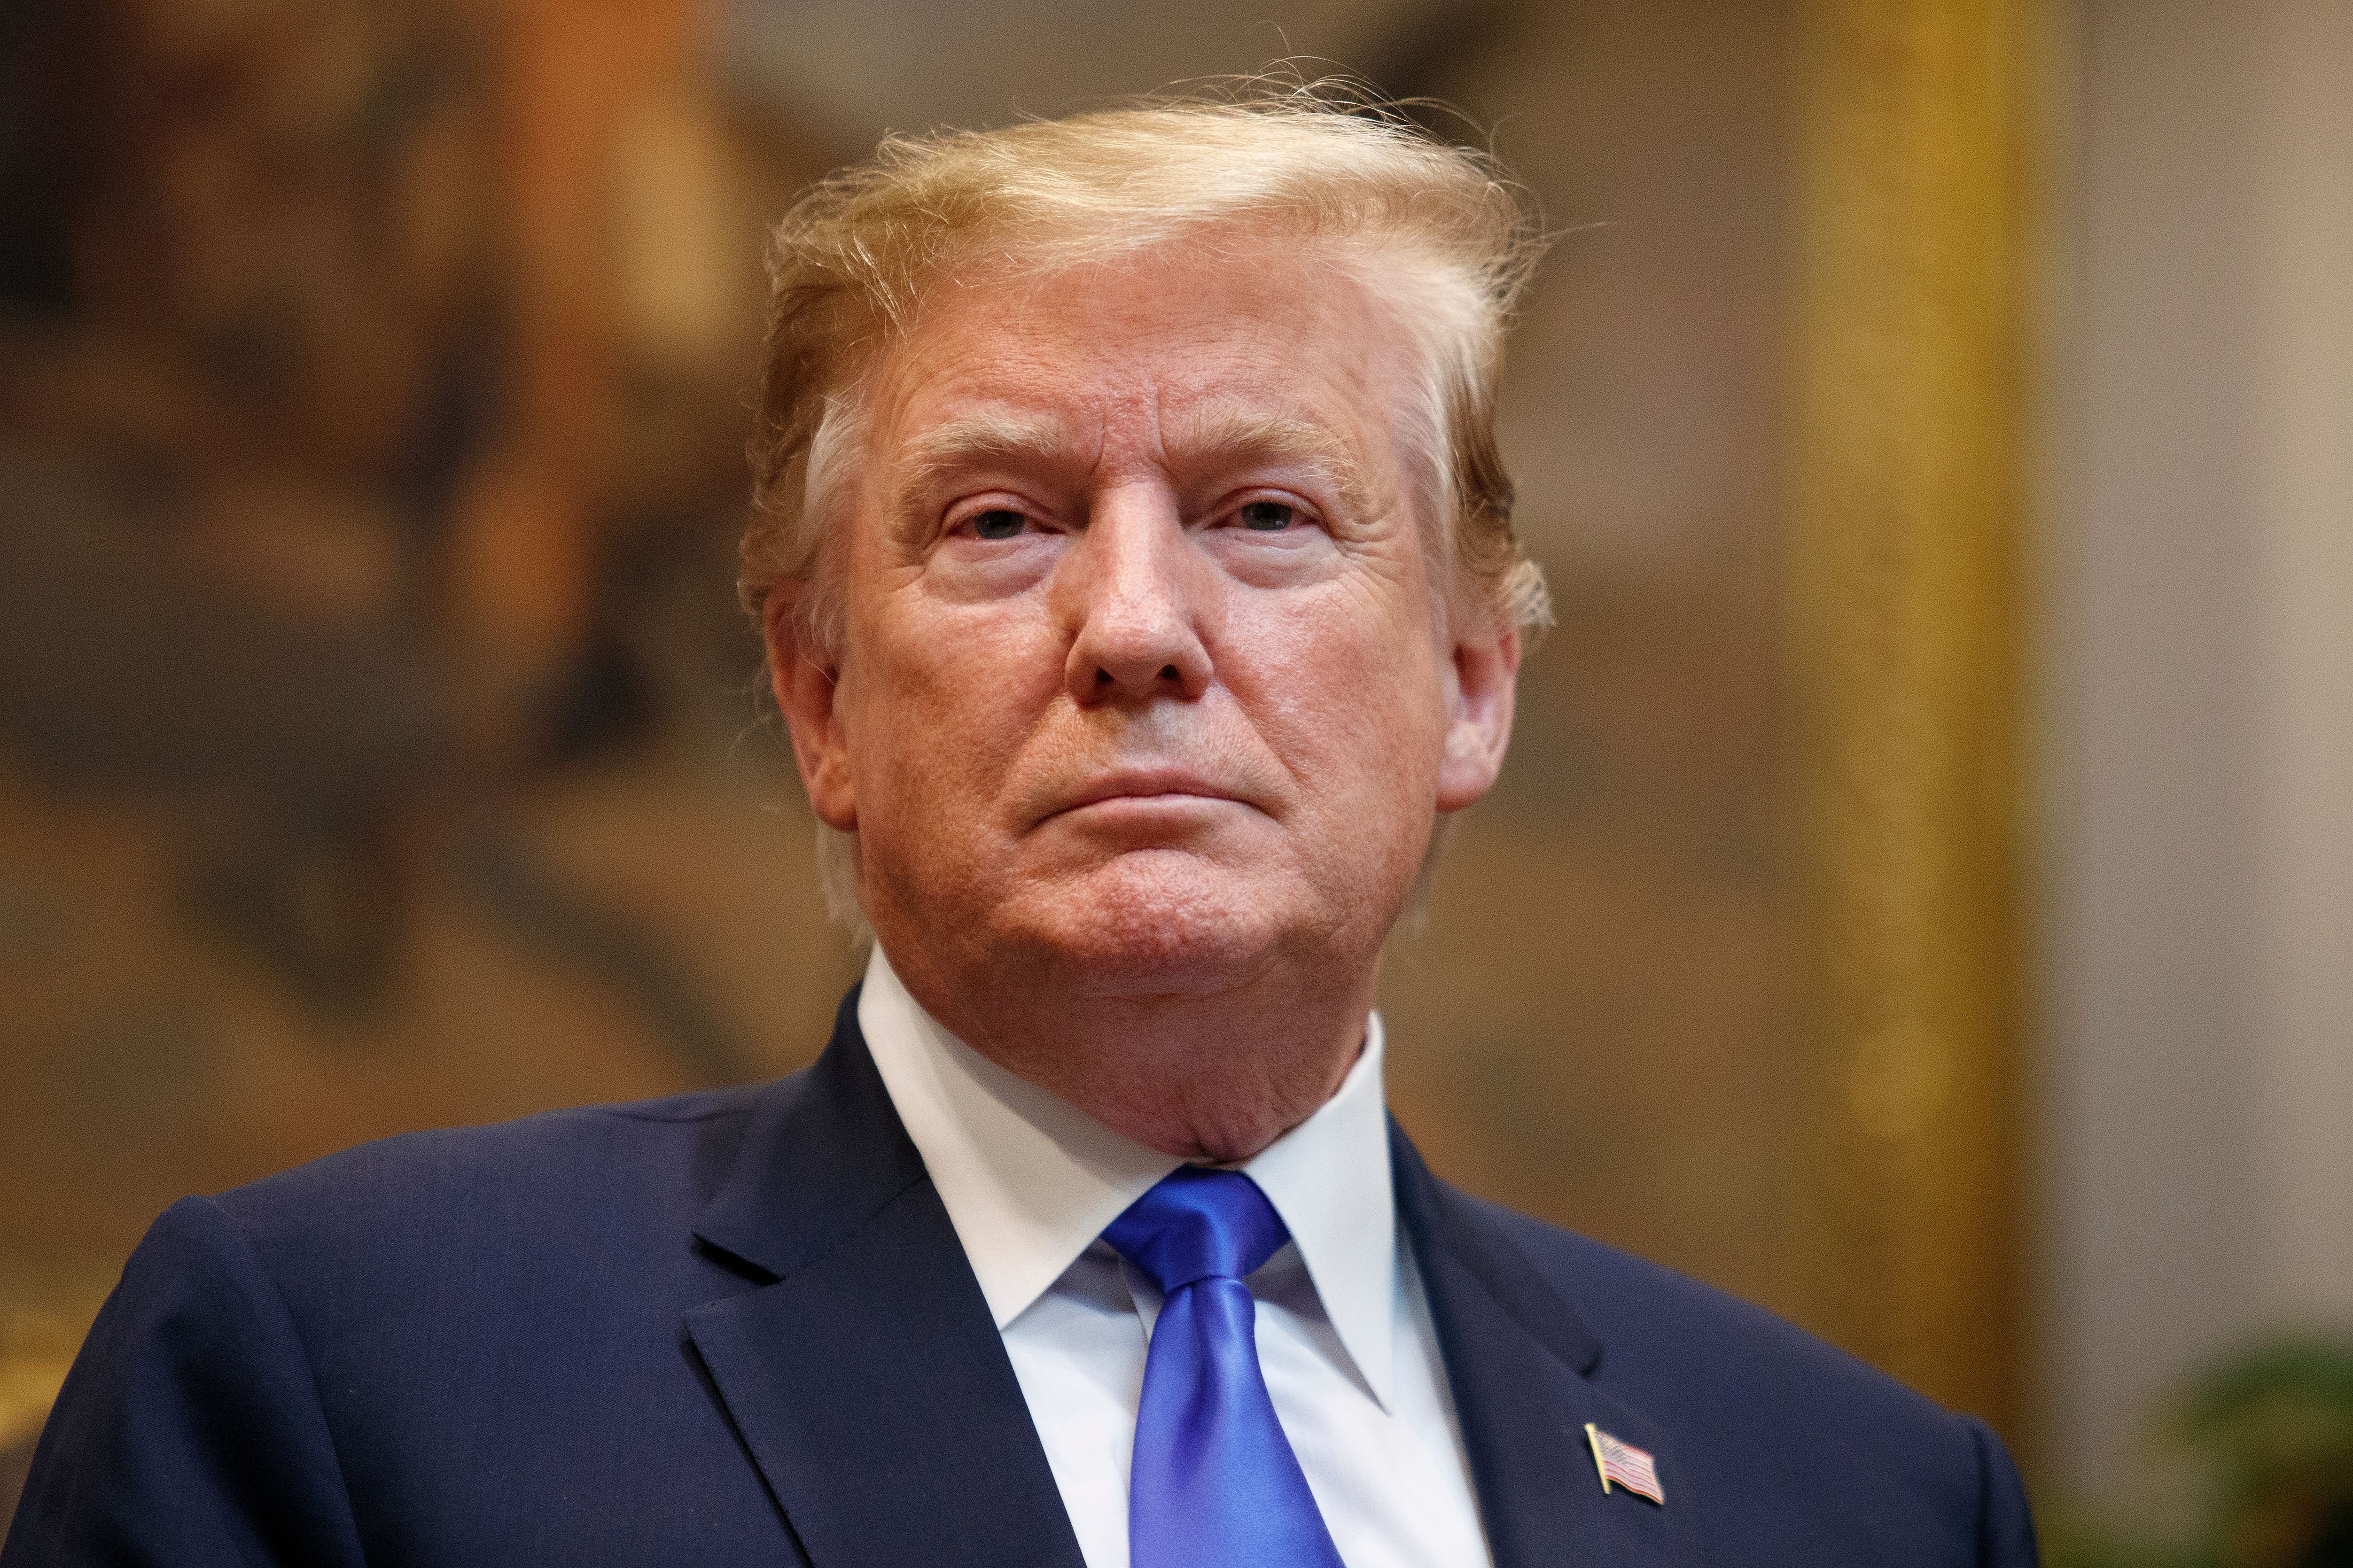 Donald Trump sharing his views on 5G deployment in America on April 12, 2019 in Washington. | Photo: Getty Images